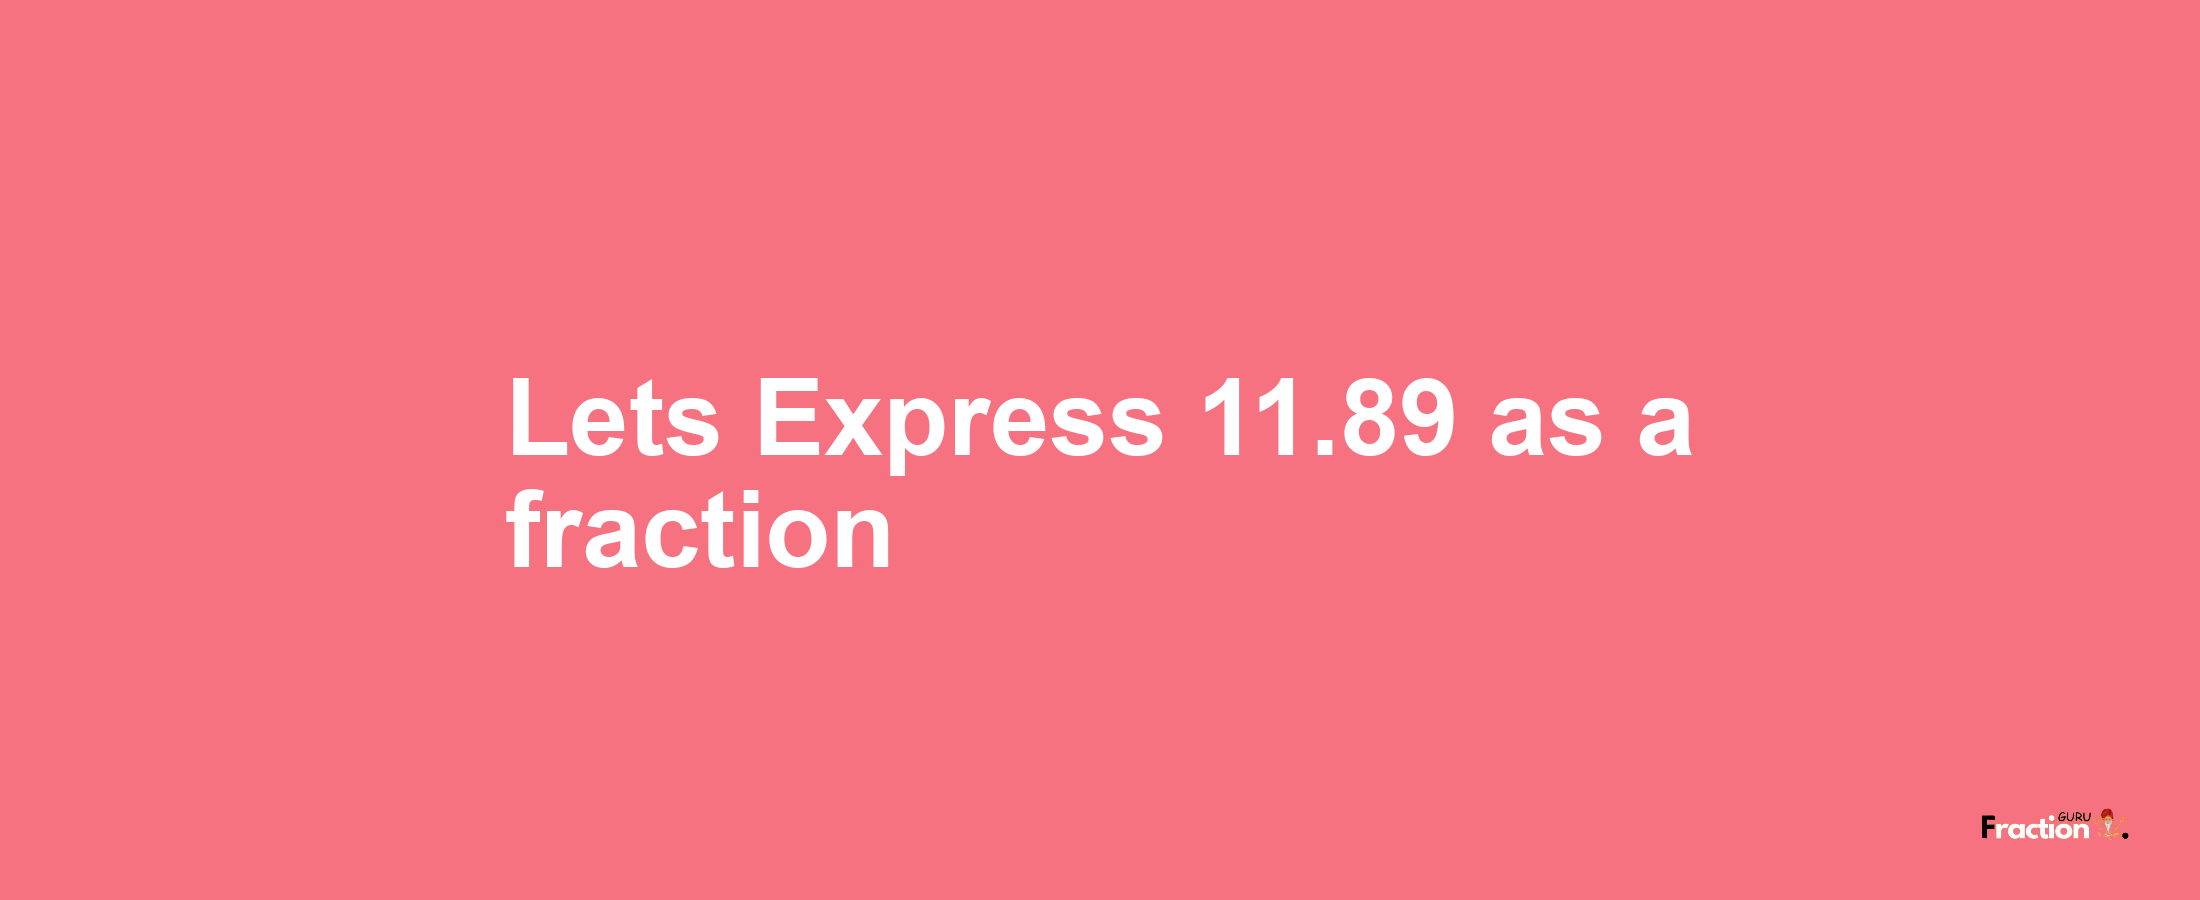 Lets Express 11.89 as afraction